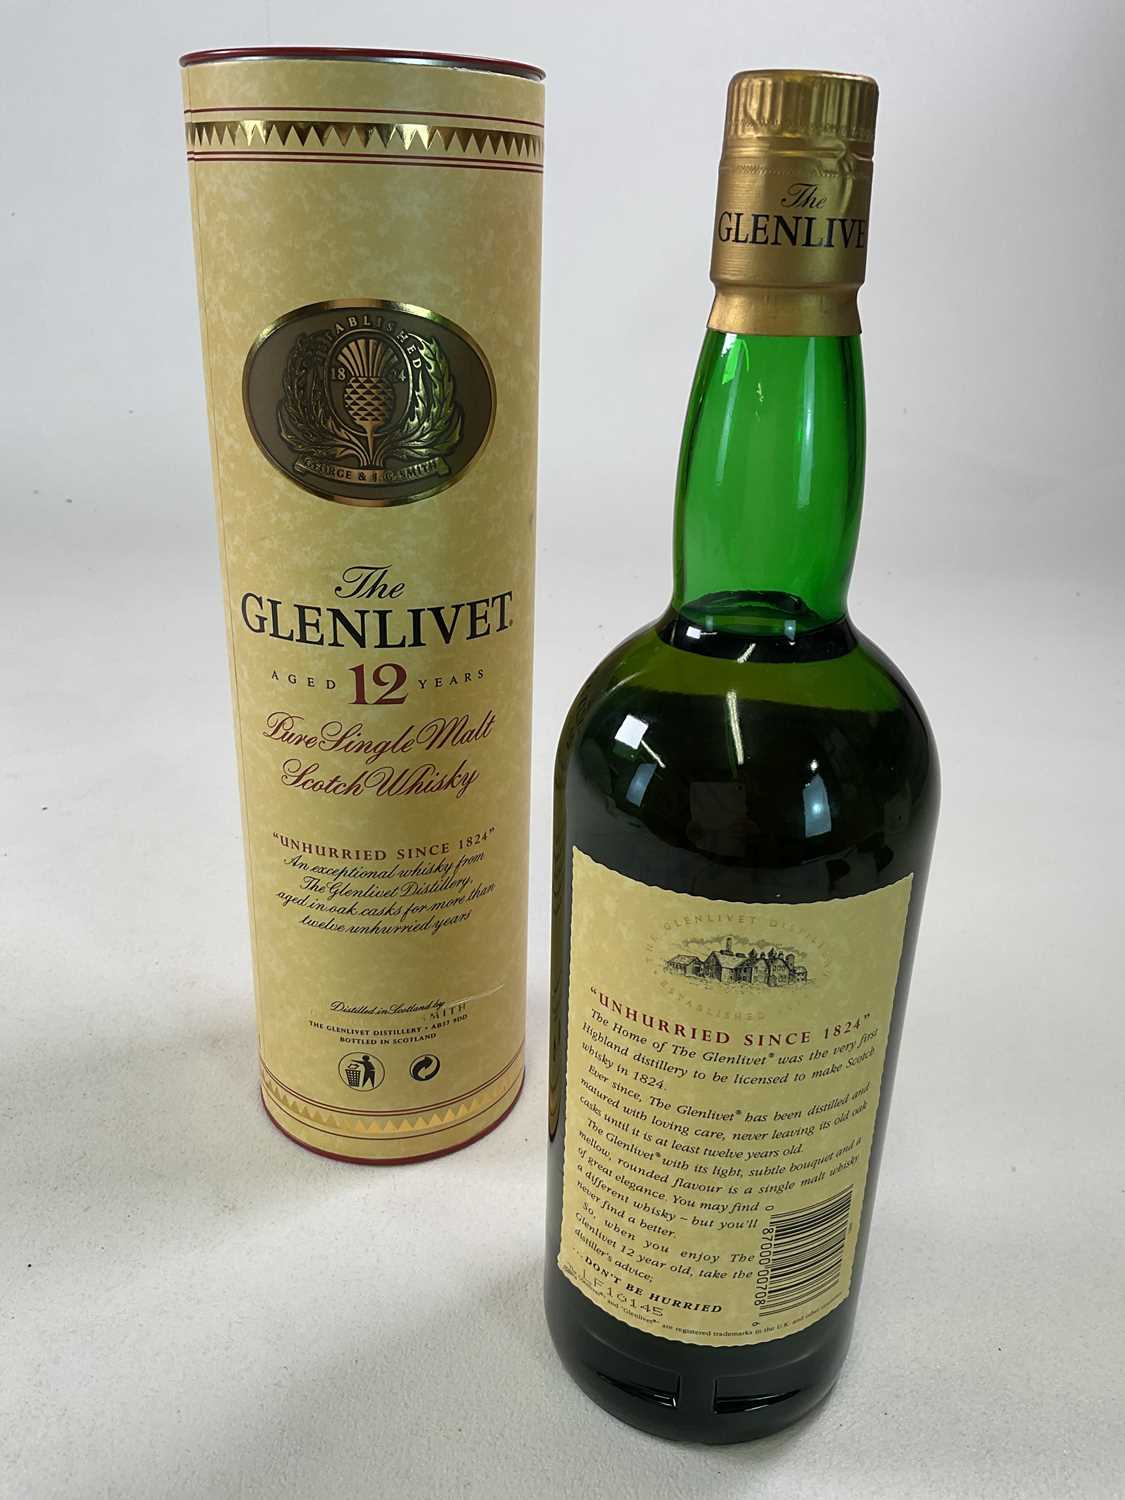 WHISKY; a bottle of The Glenlivet Pure Single Malt Scotch whisky, aged 12 years, 40%, 1 ltr, in - Image 2 of 2